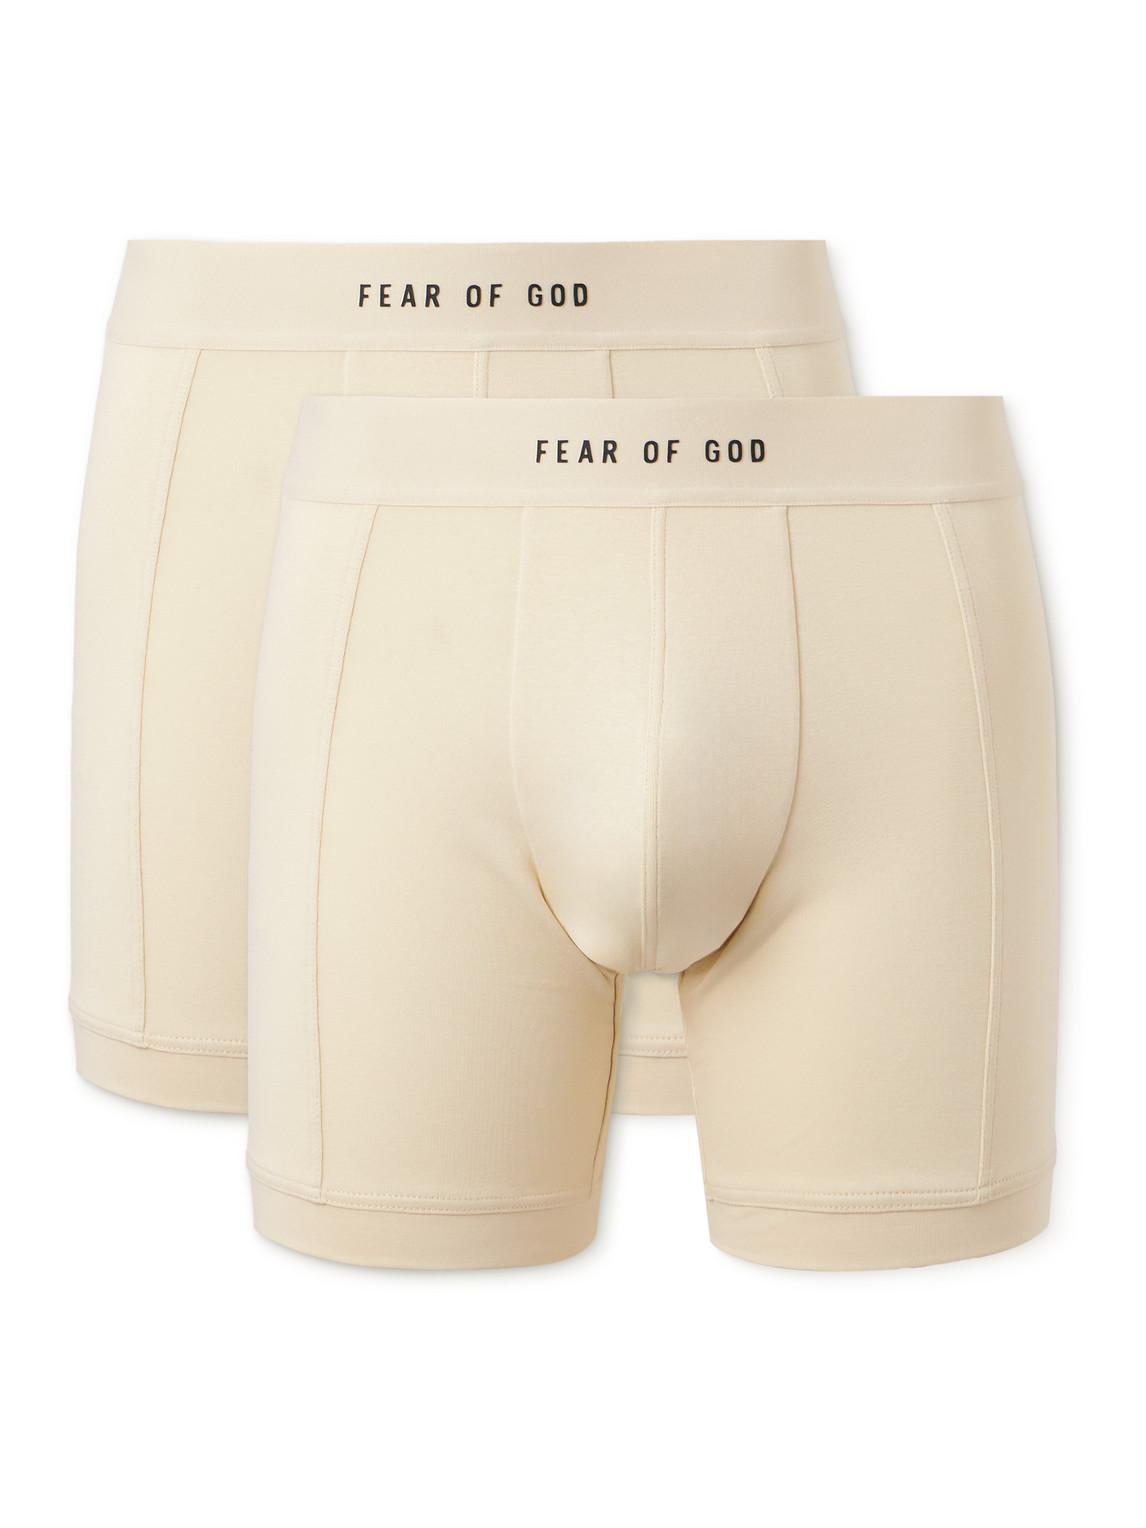 FEAR OF GOD TWO-PACK STRETCH-COTTON JERSEY BOXER BRIEFS